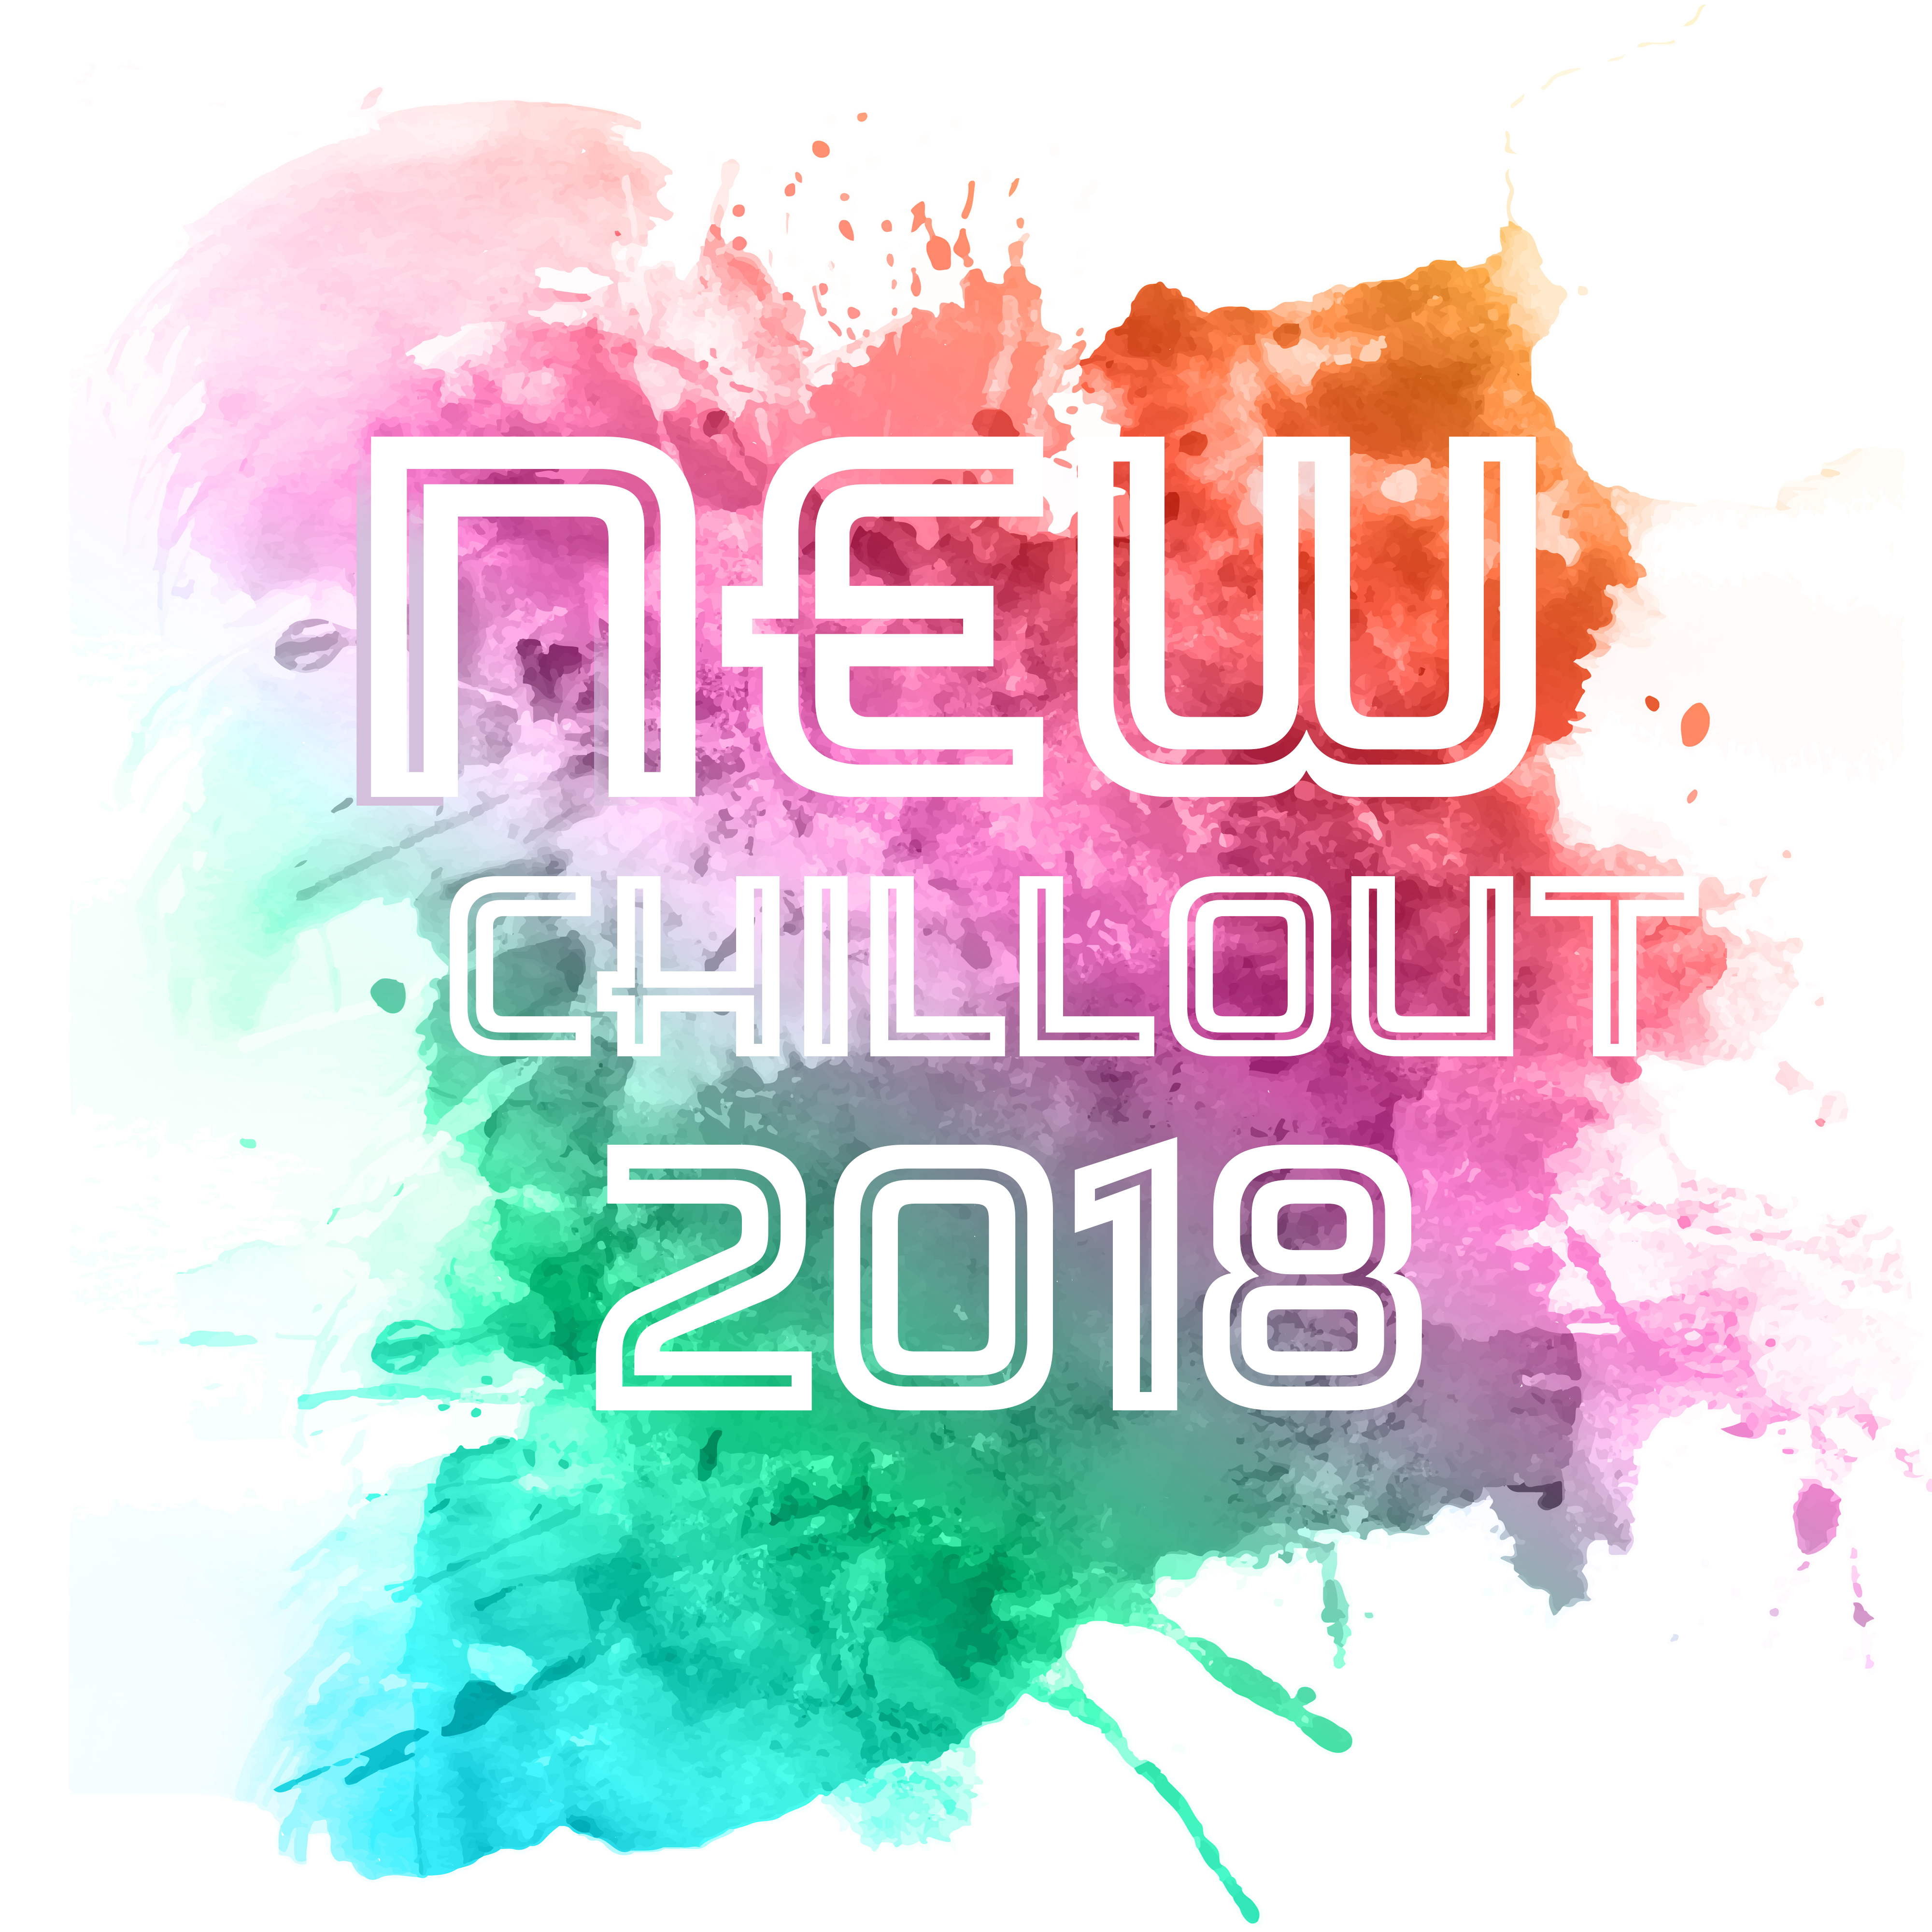 New Chillout 2018